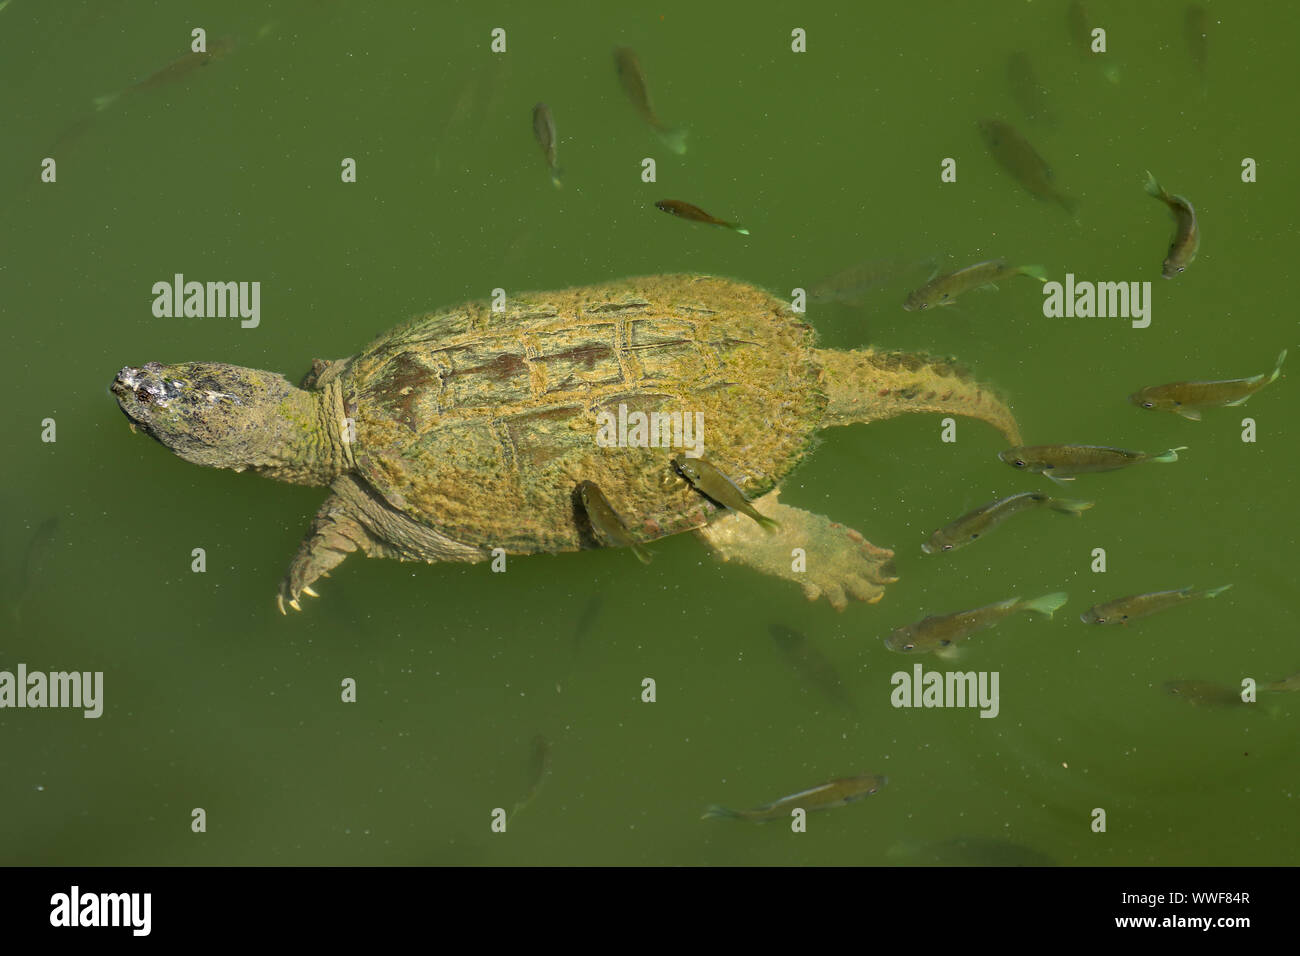 snapping turtle, Chelydra serpentina, and bluegills, Lepomis macrochirus, bluegills attempting to feed on the algae on turtle's carapace, Maryland Stock Photo